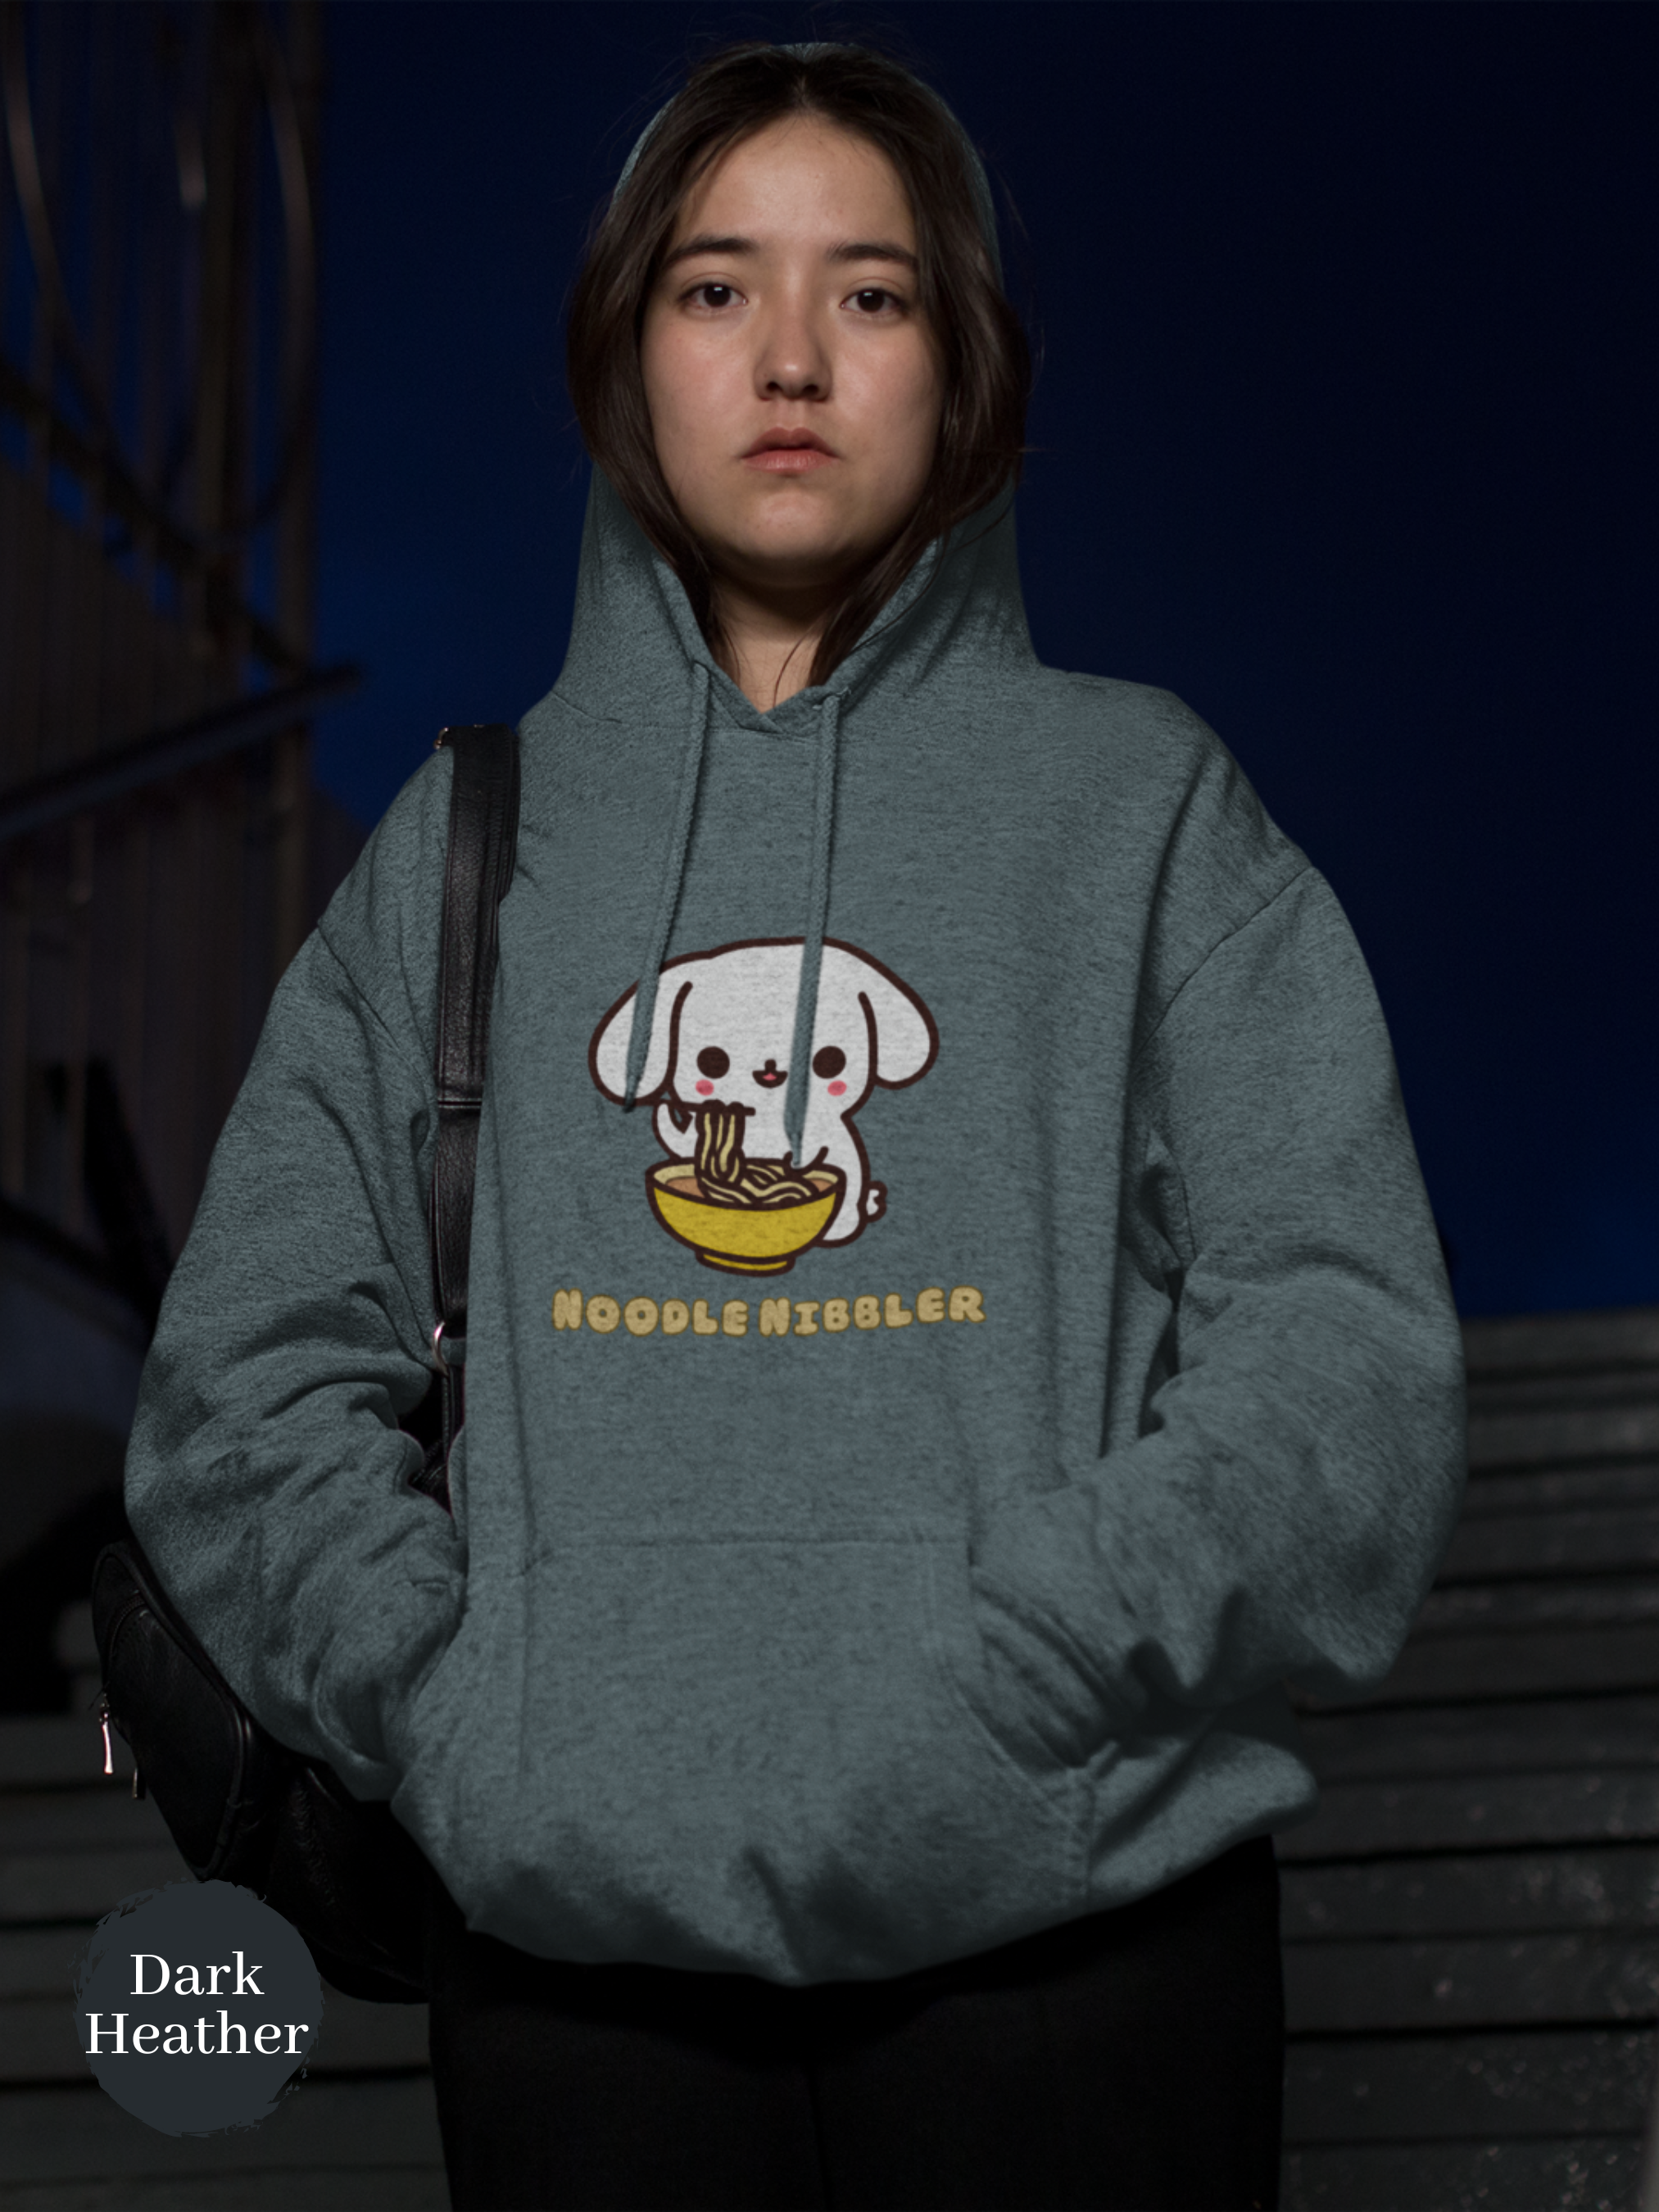 Ramen Hoodie: Noodle Nibbler Bunny Edition - A Cozy Pun Hoodie for Foodie Fans of Ramen Art and Asian Cuisine